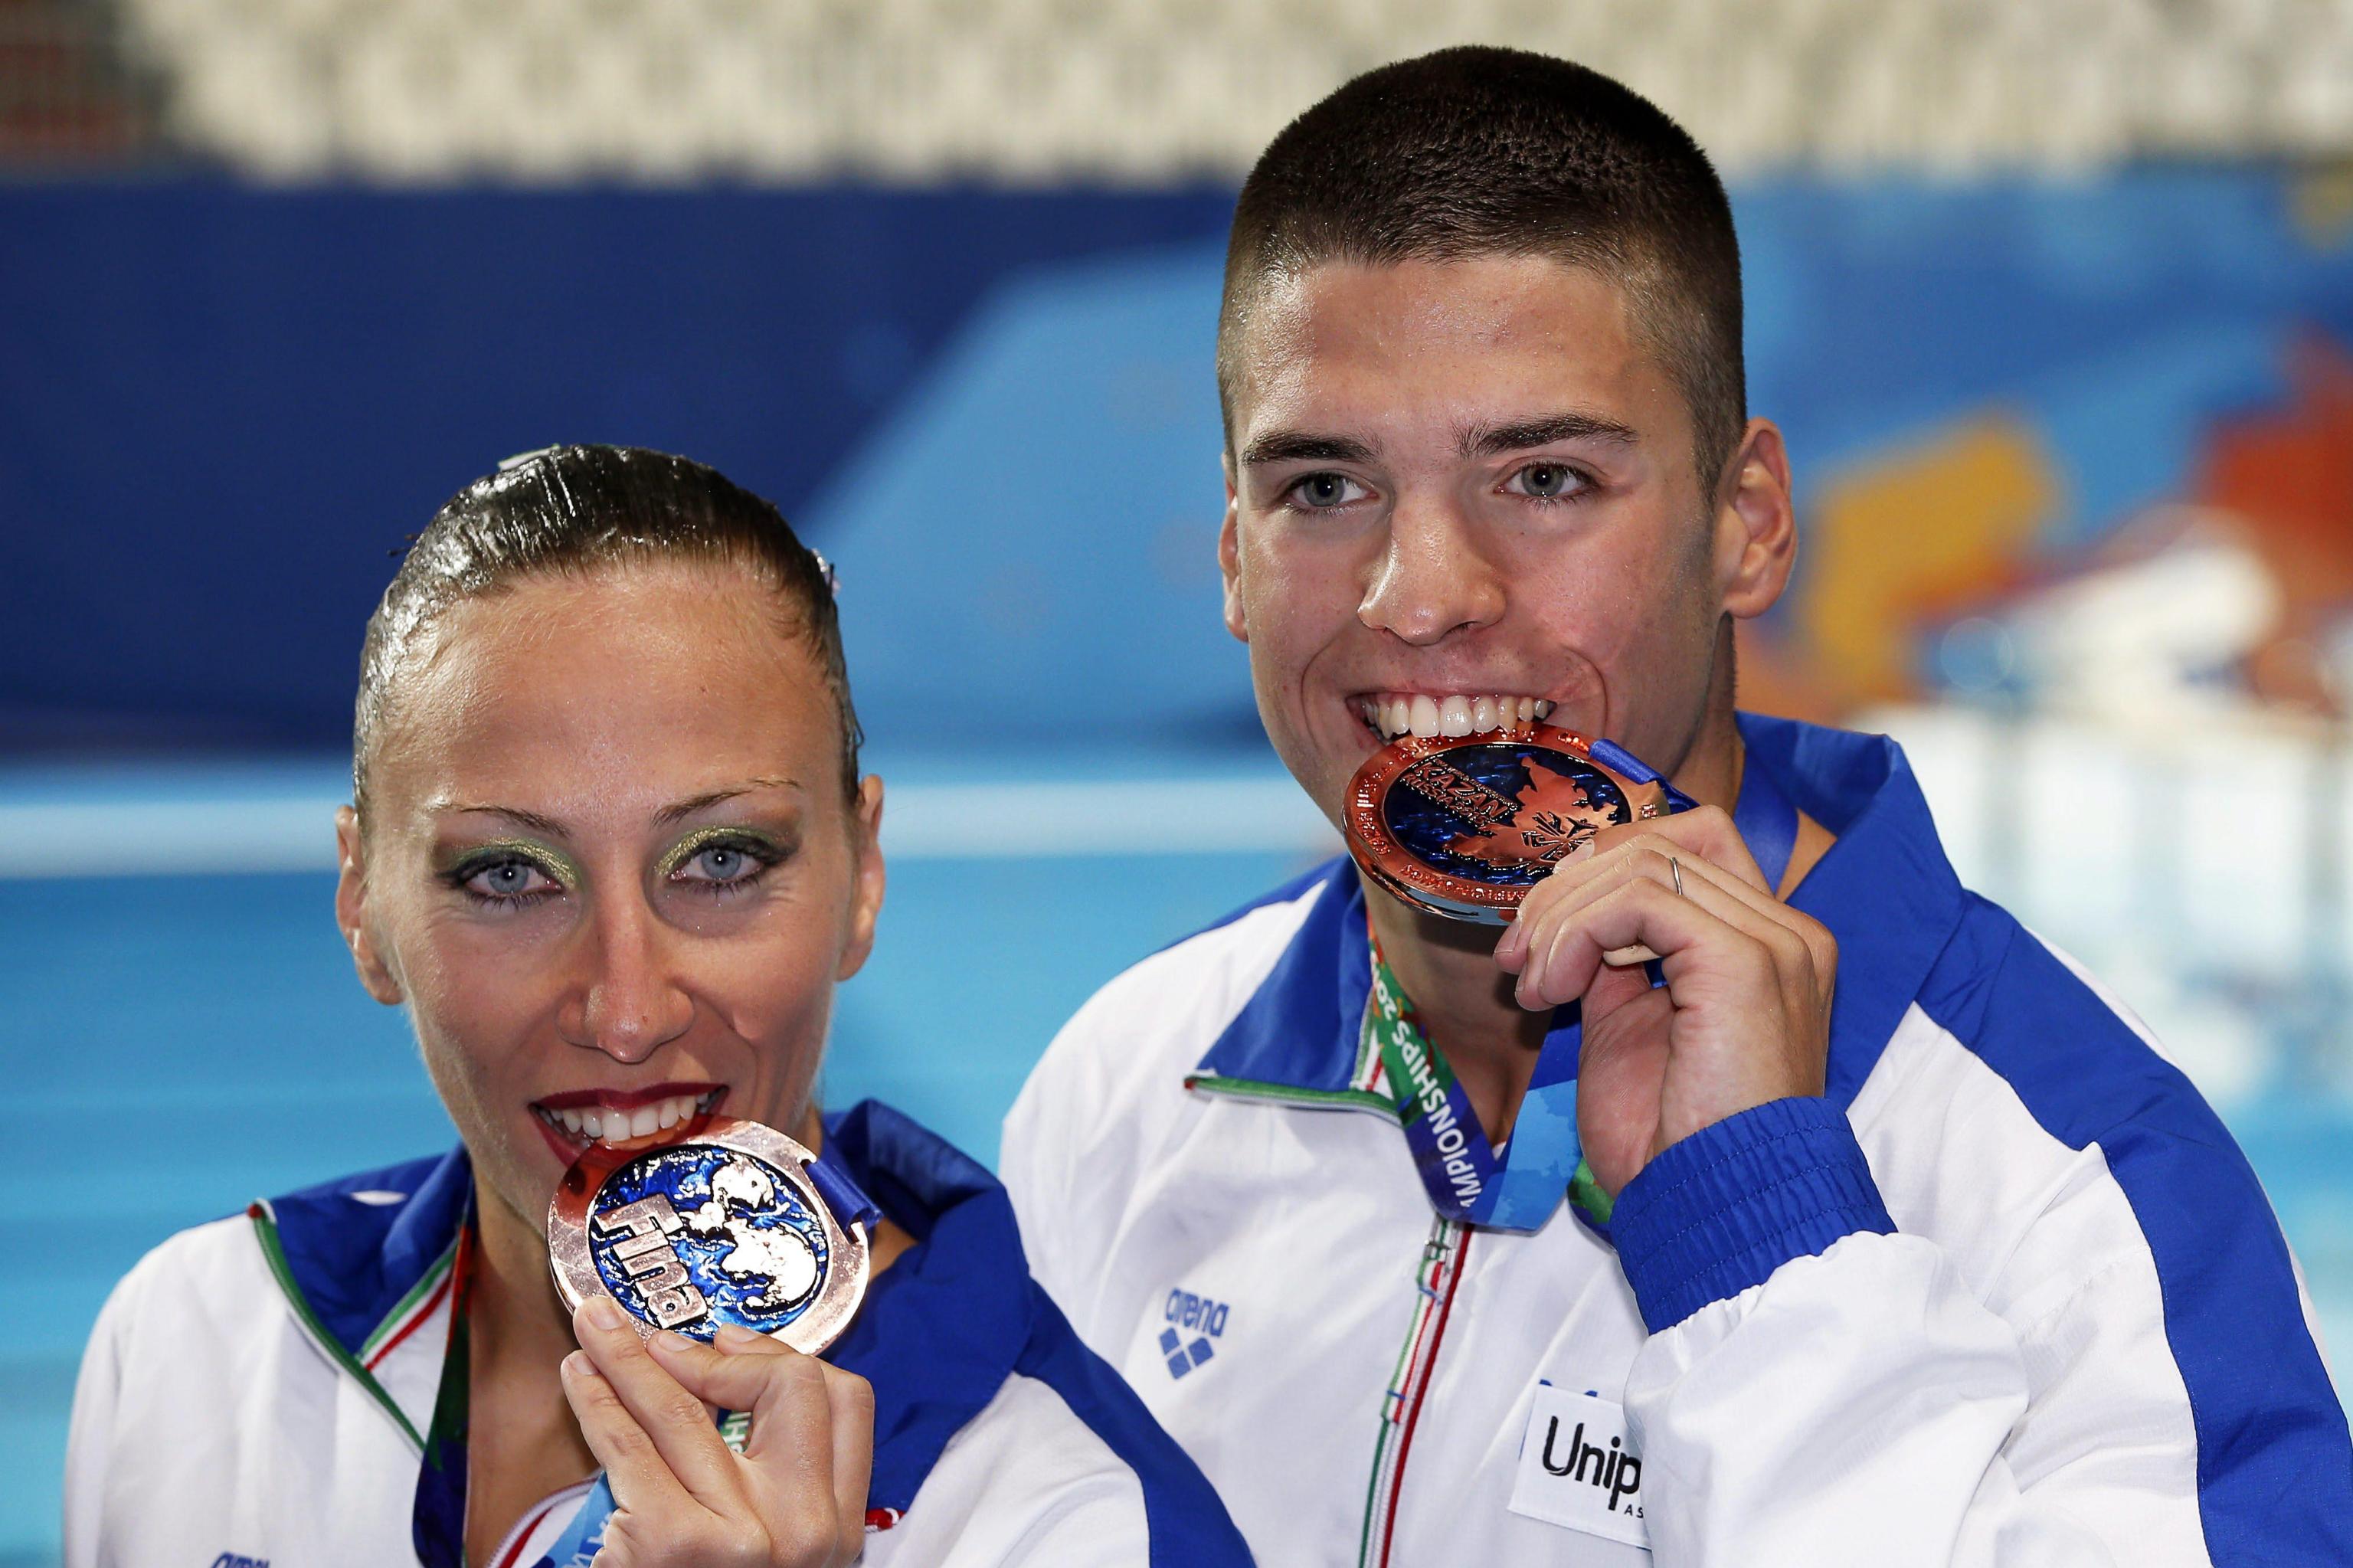 Manila Flamini (L) and Giorgio Minisini (R) of Italy pose with their bronze medals of the Synchronized Swimming events at the World Championships in Kazan